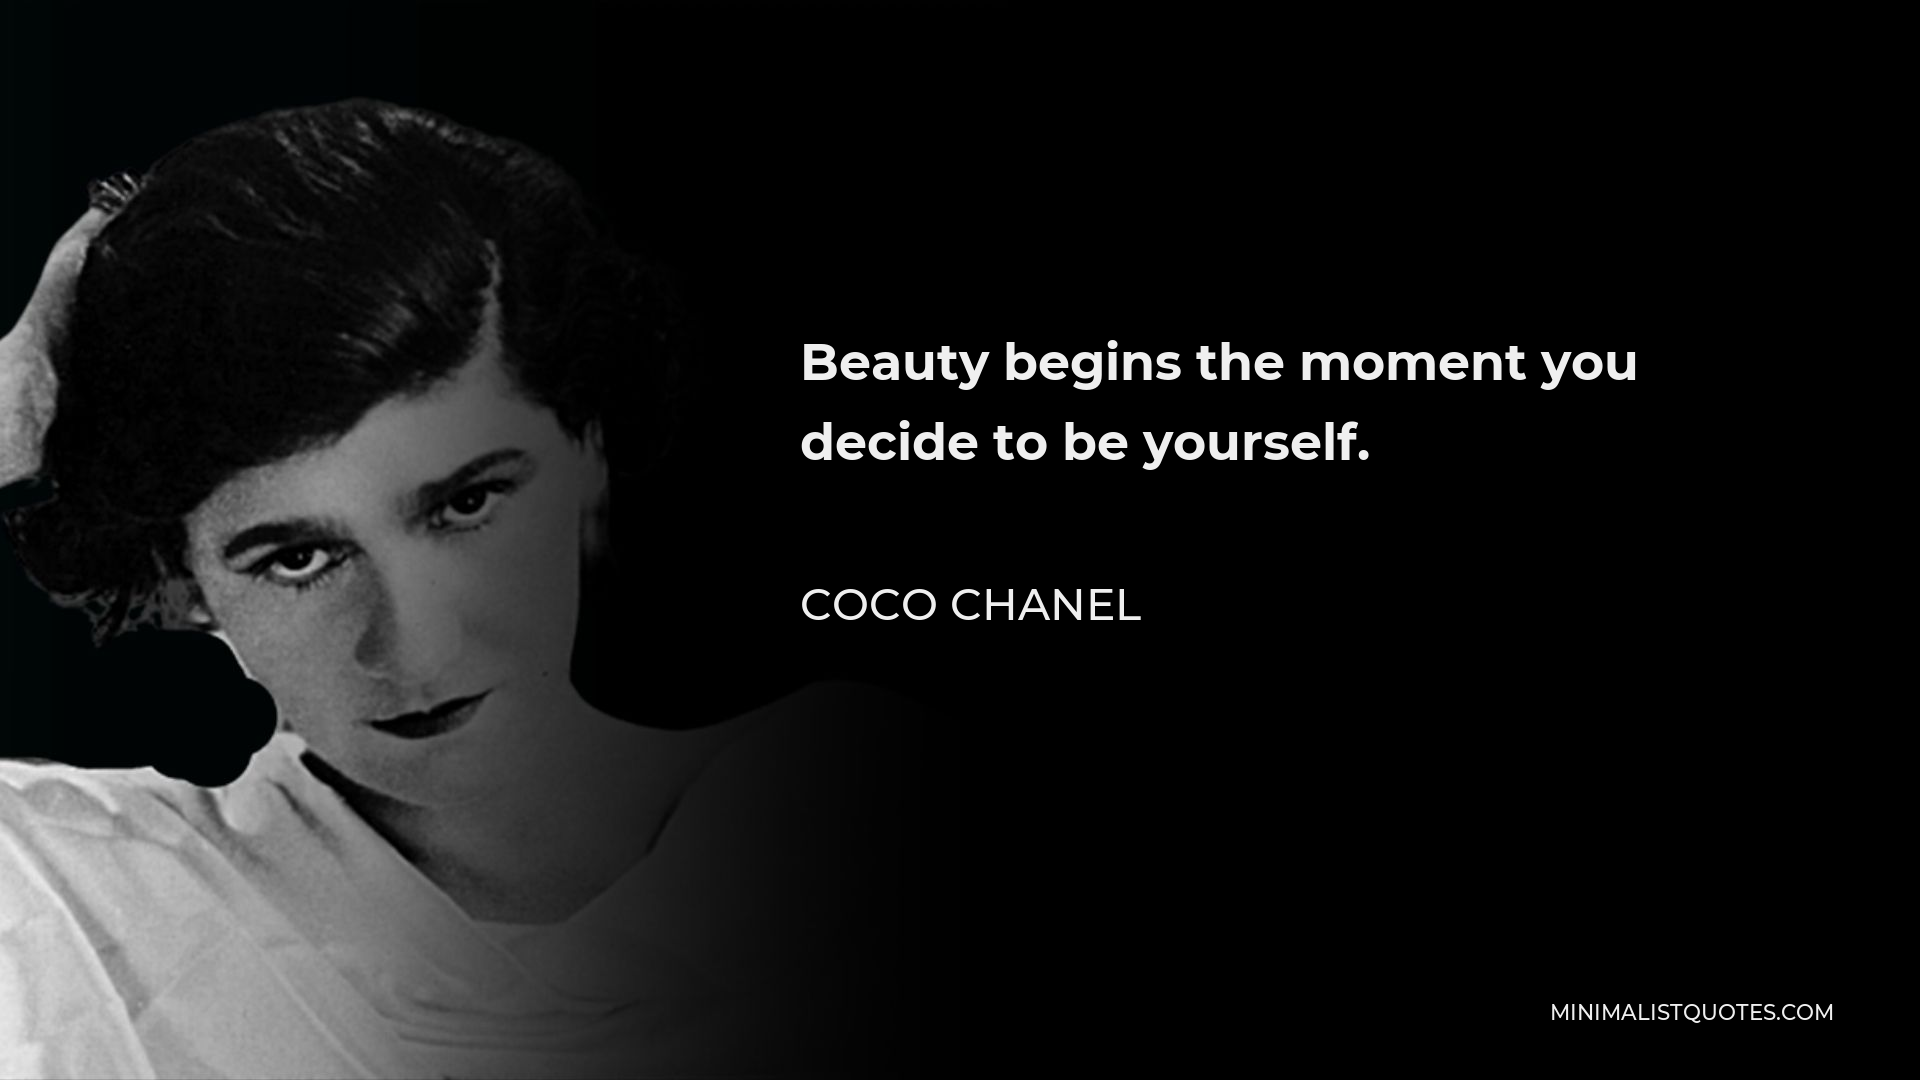 Beauty begins the moment you decide to be yourself Coco Chanel